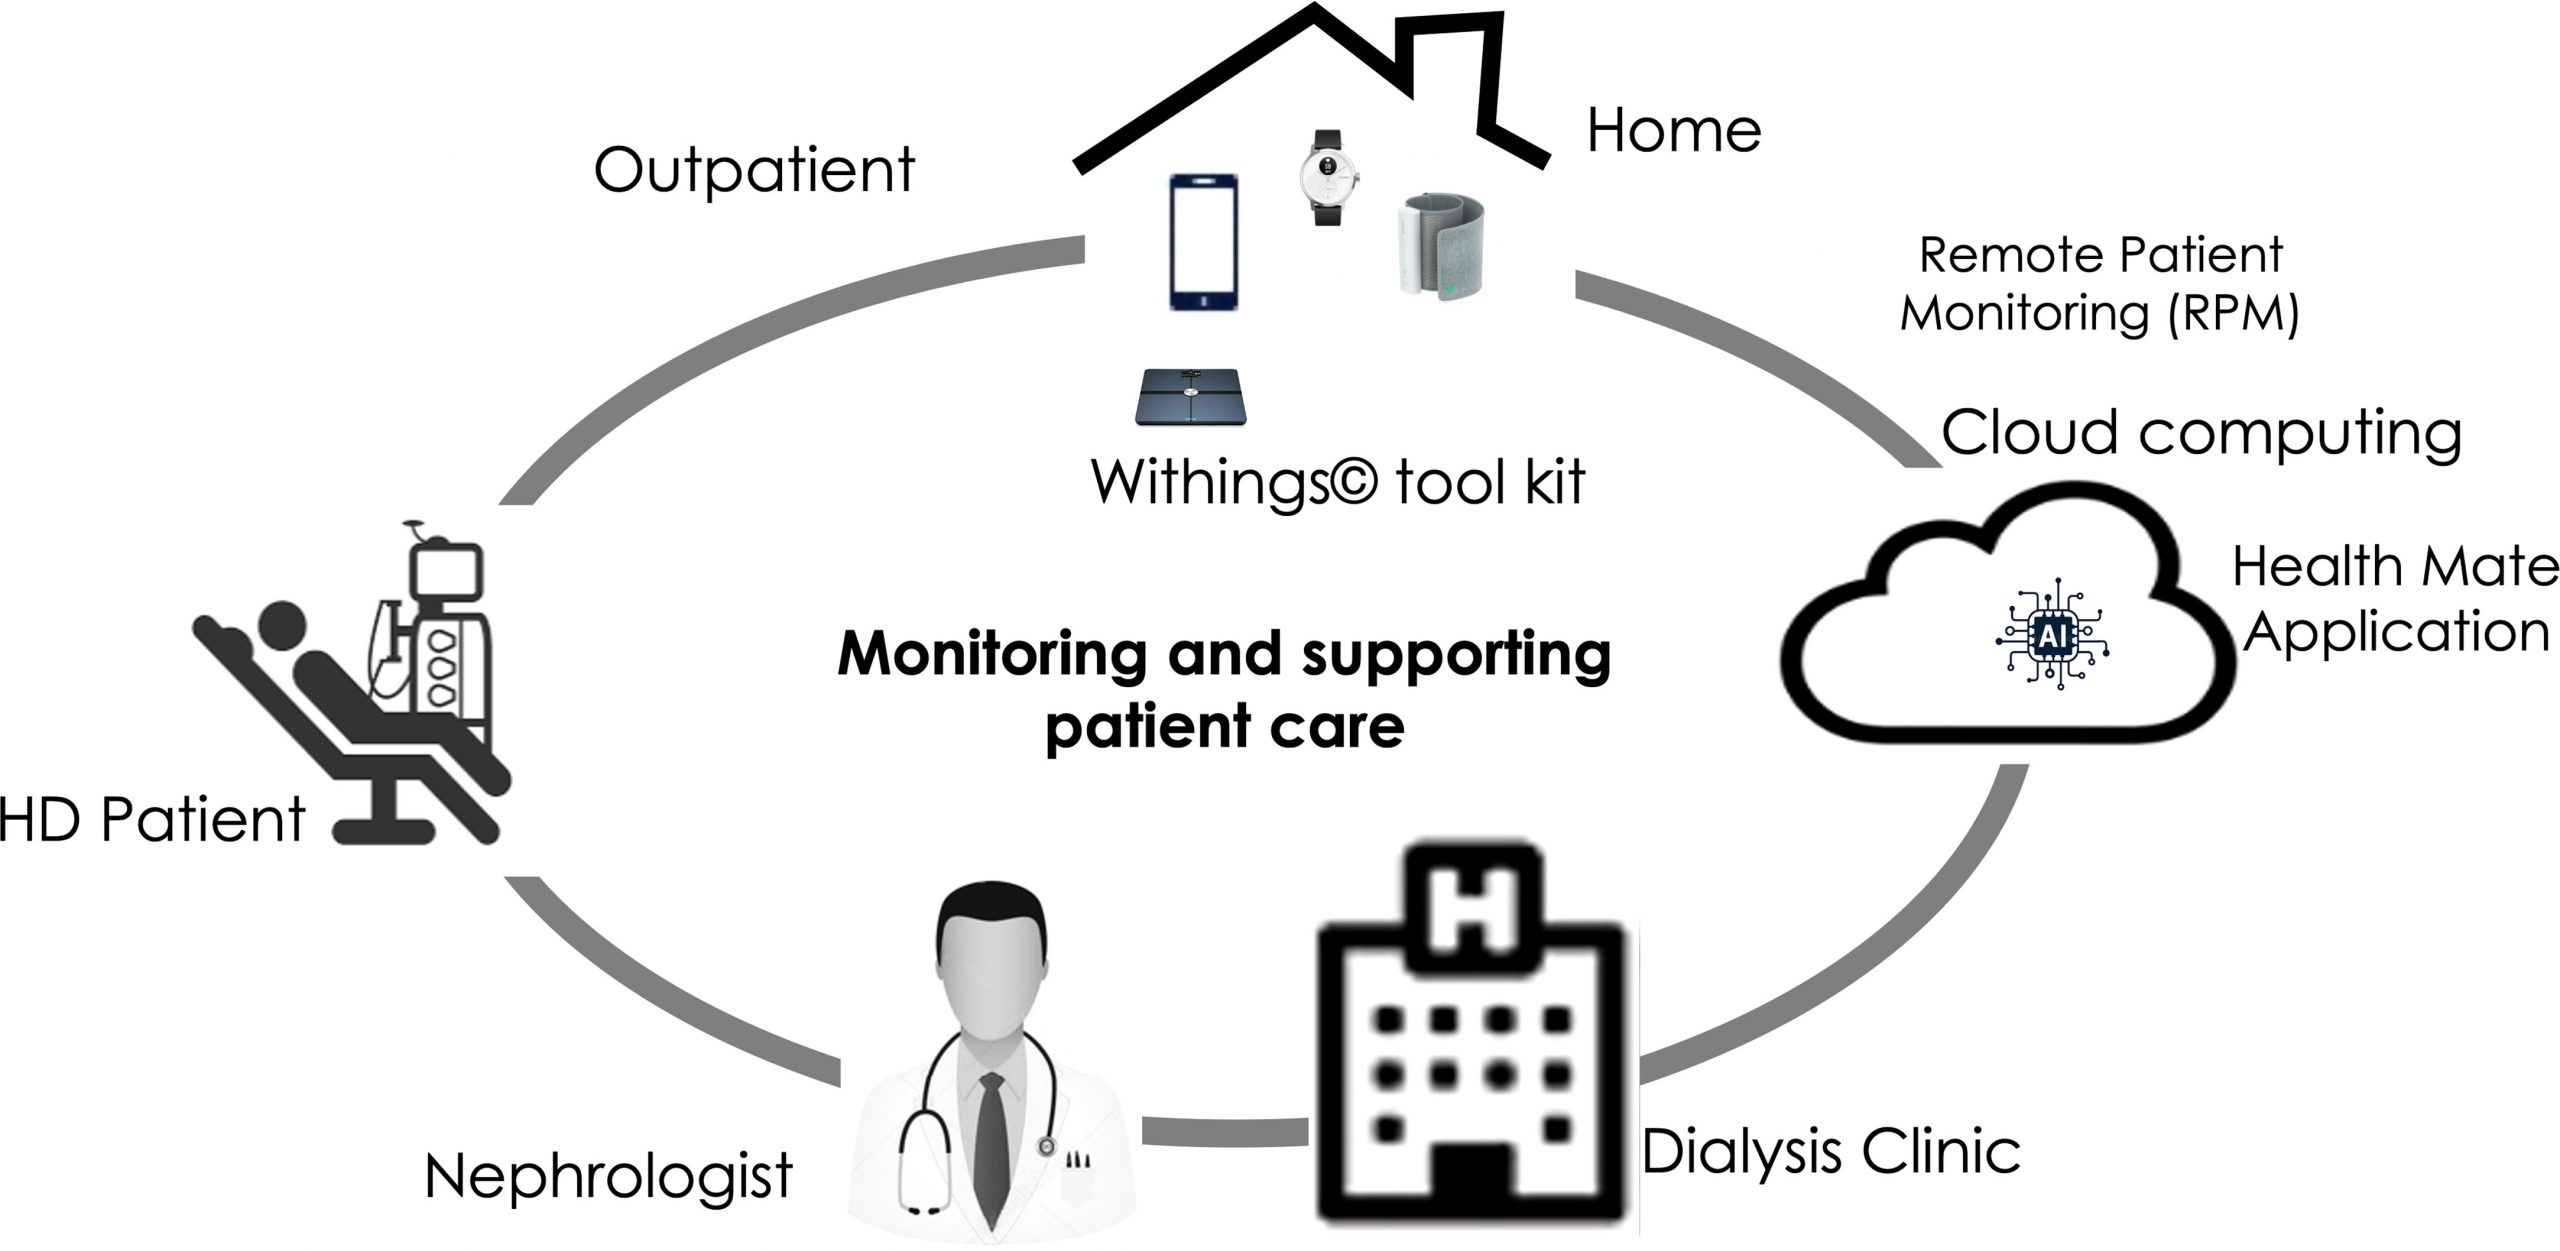  Withings toolkit health sensing tool: A way to support care and improve outcomes of chronic kidney disease patients?